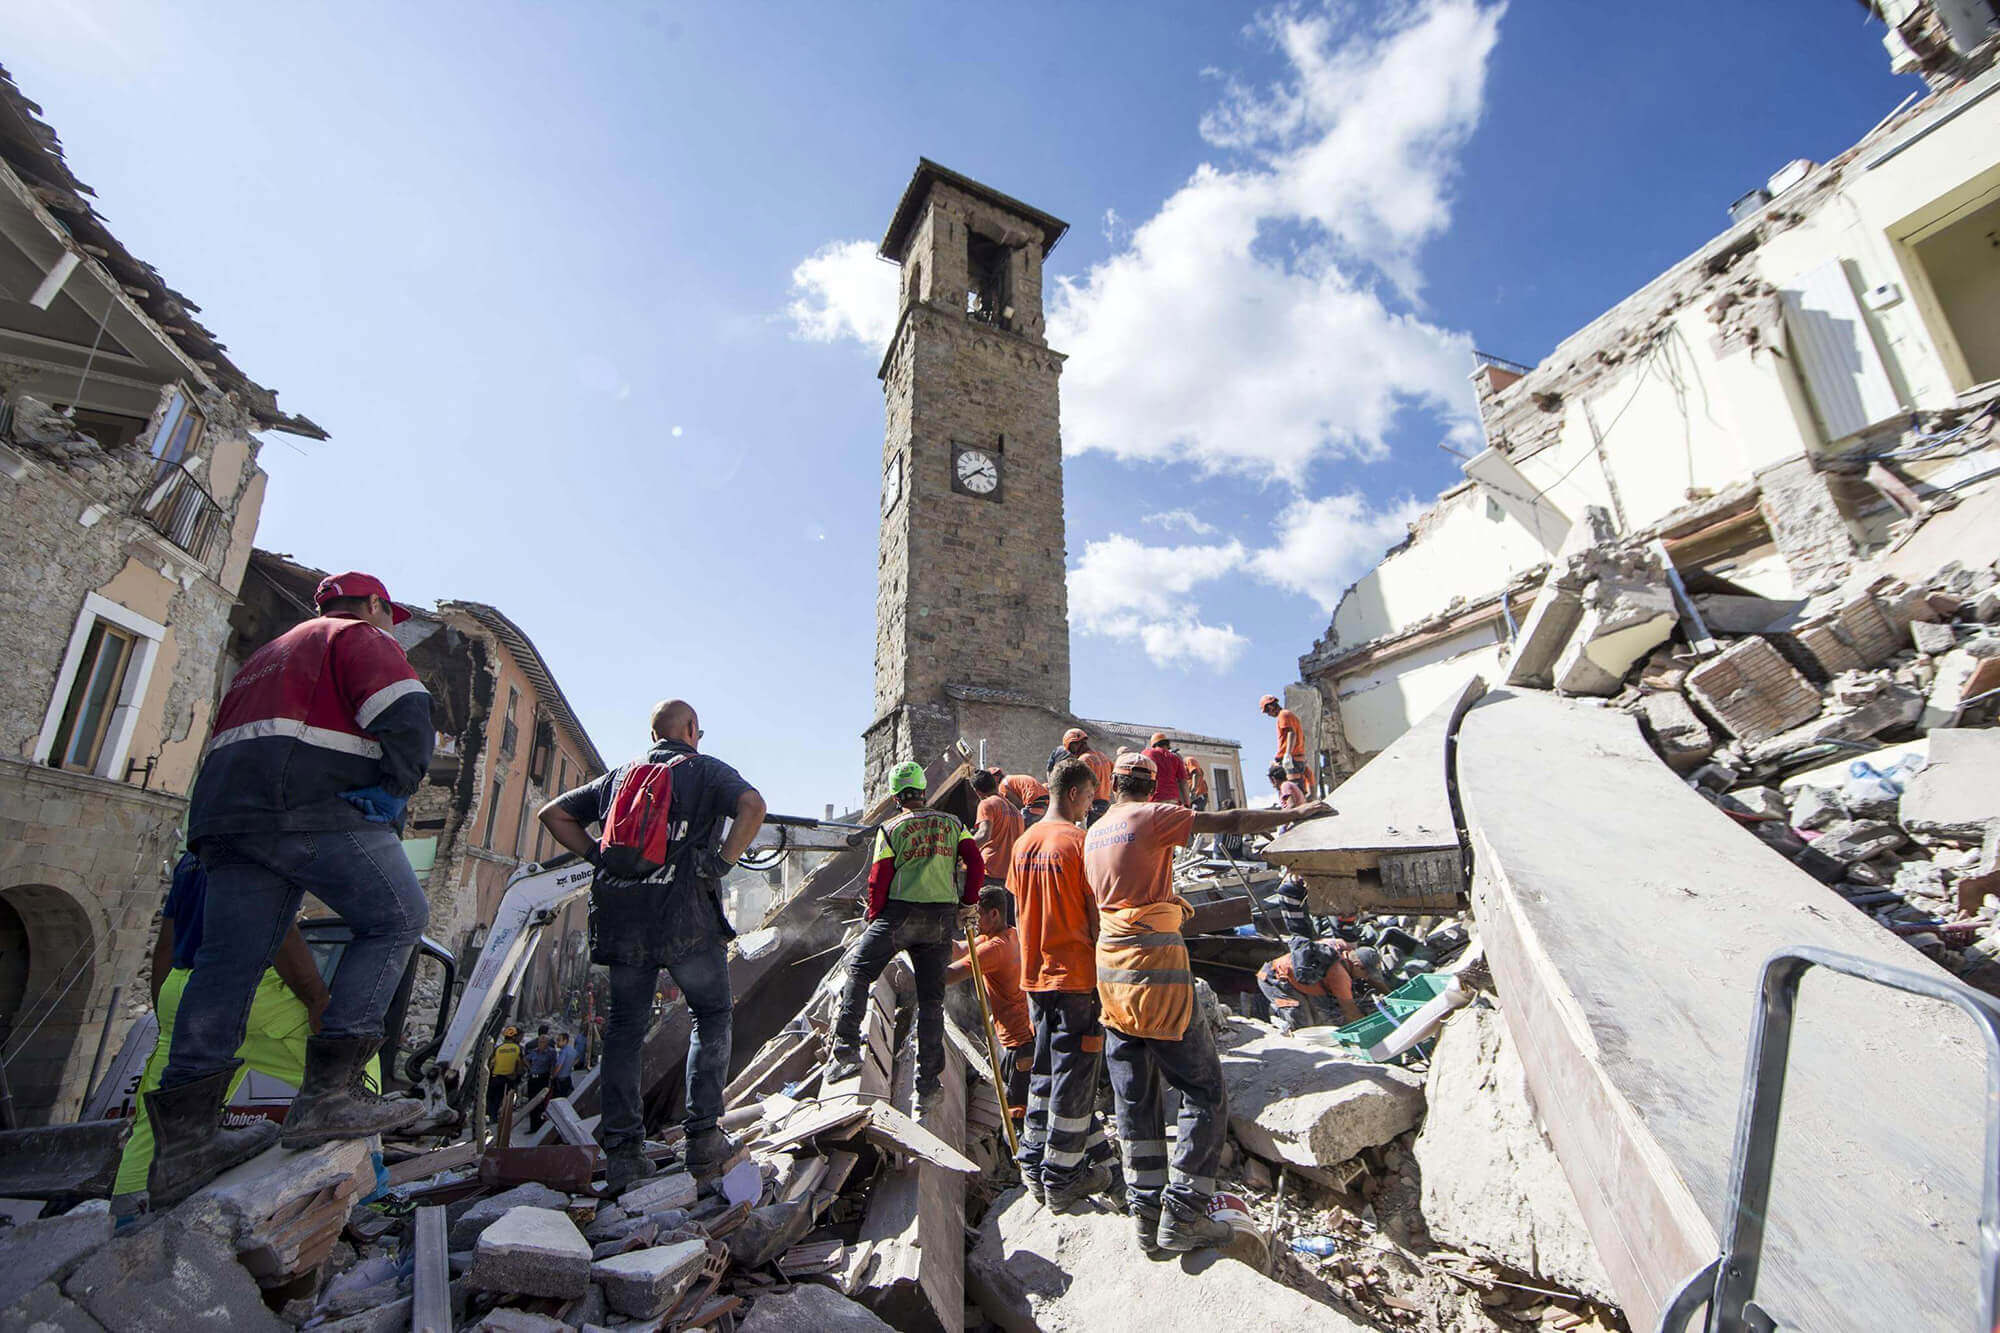 Rescuers search through debris following an earthquake in Amatrice, central Italy